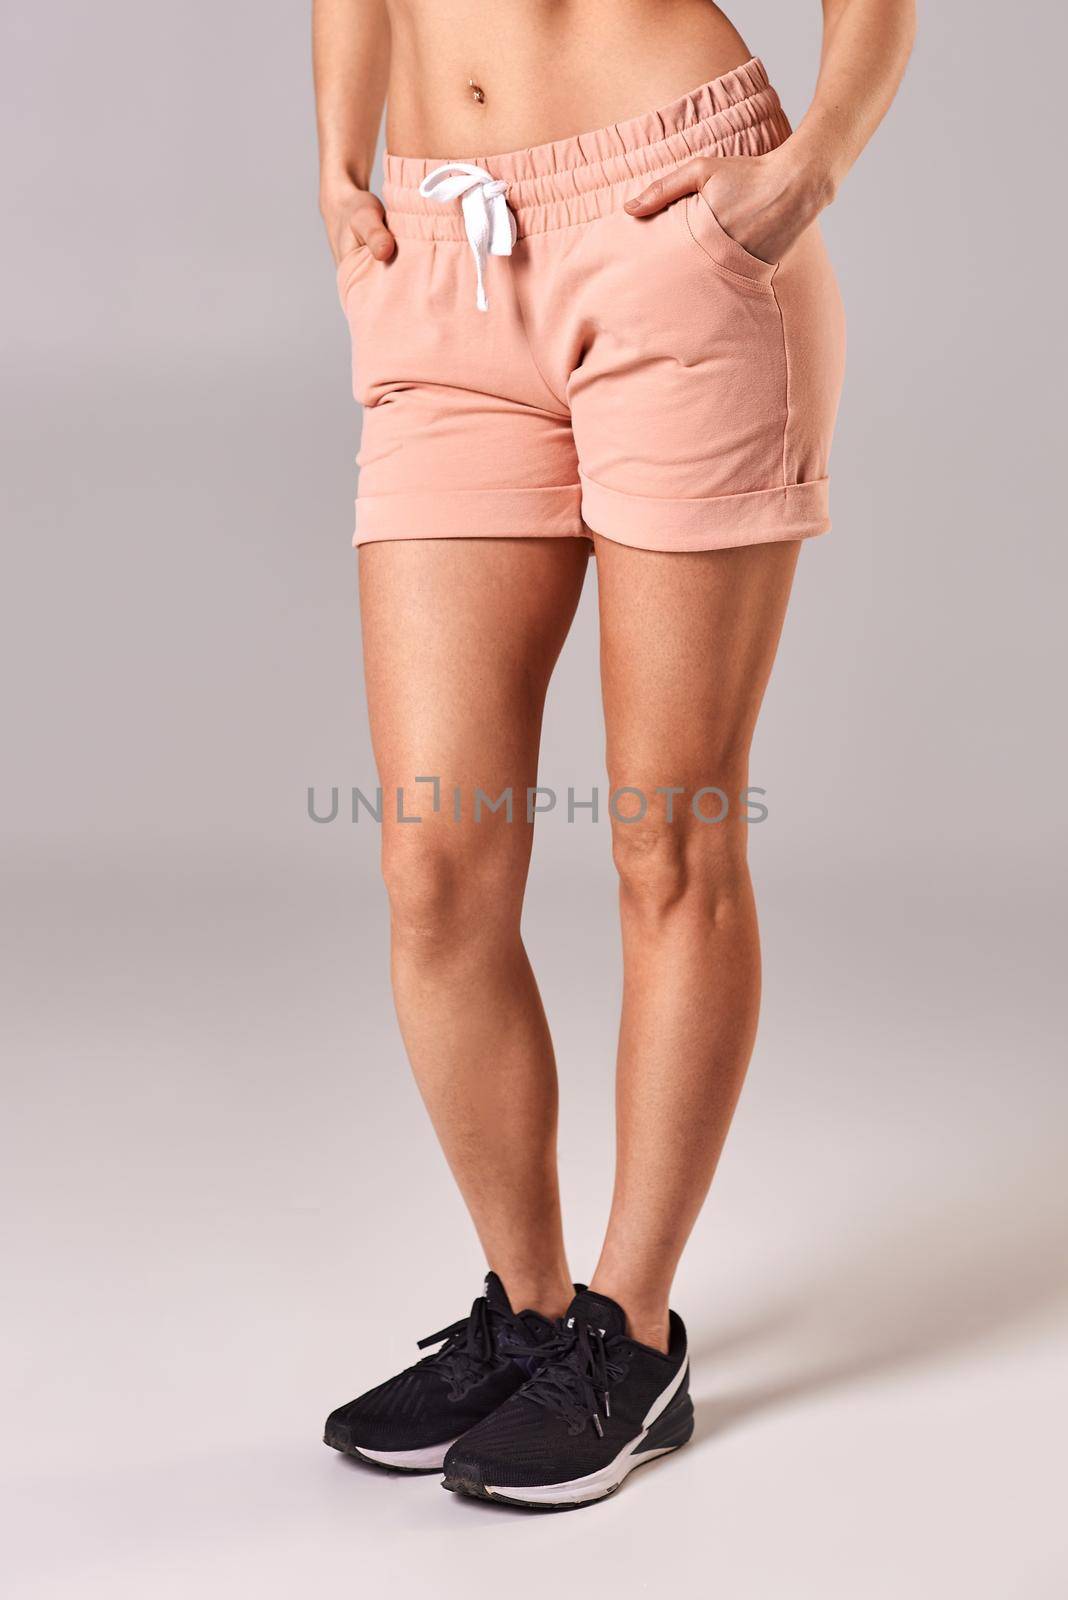 Tanned girl in pink shorts